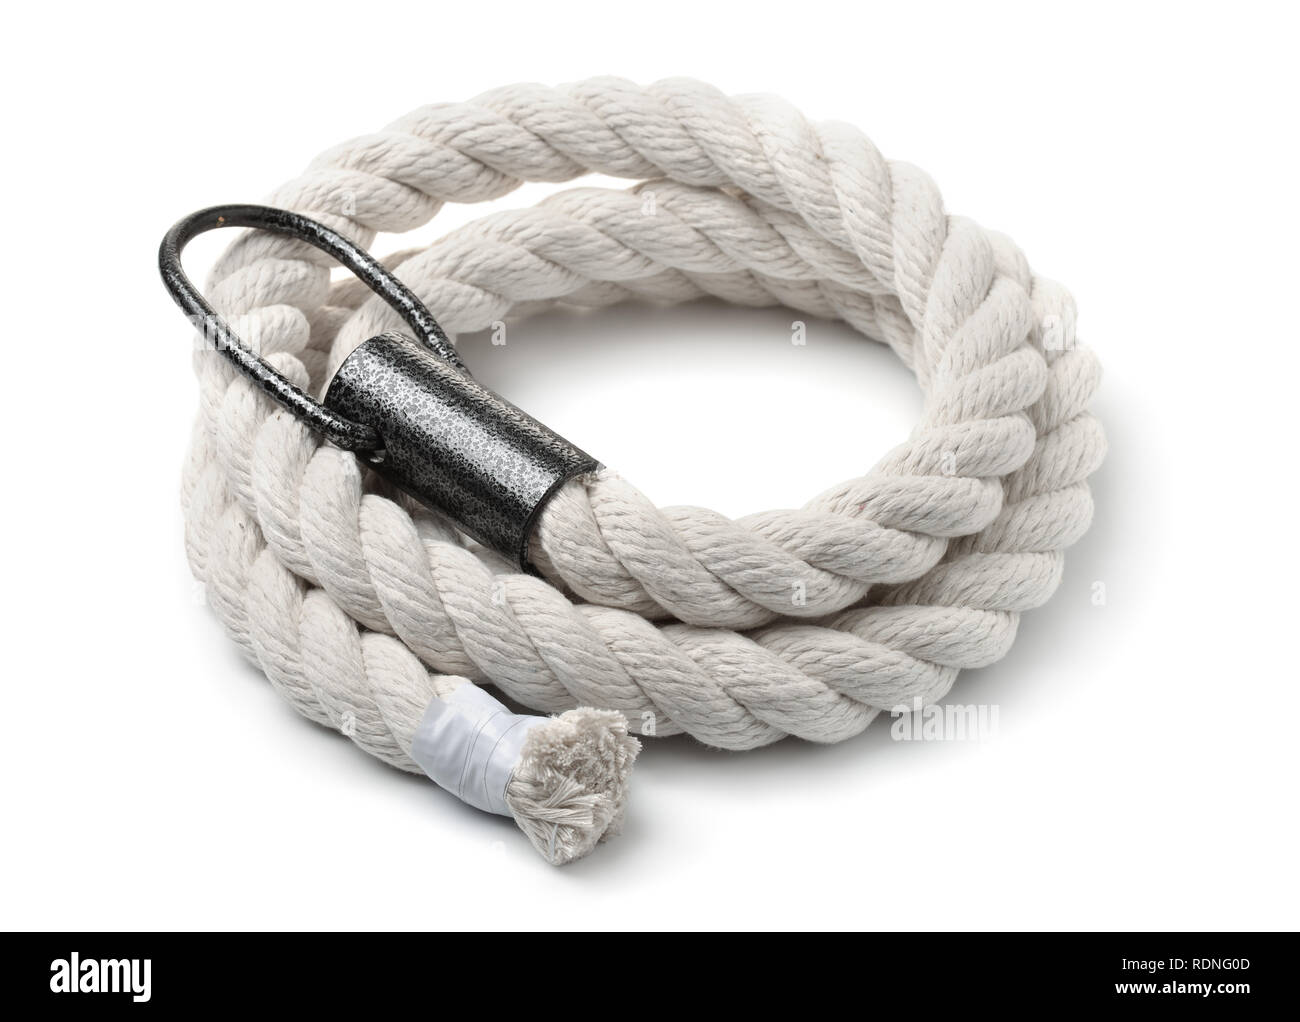 Rolled climbing gym exercise rope isolated on white Stock Photo